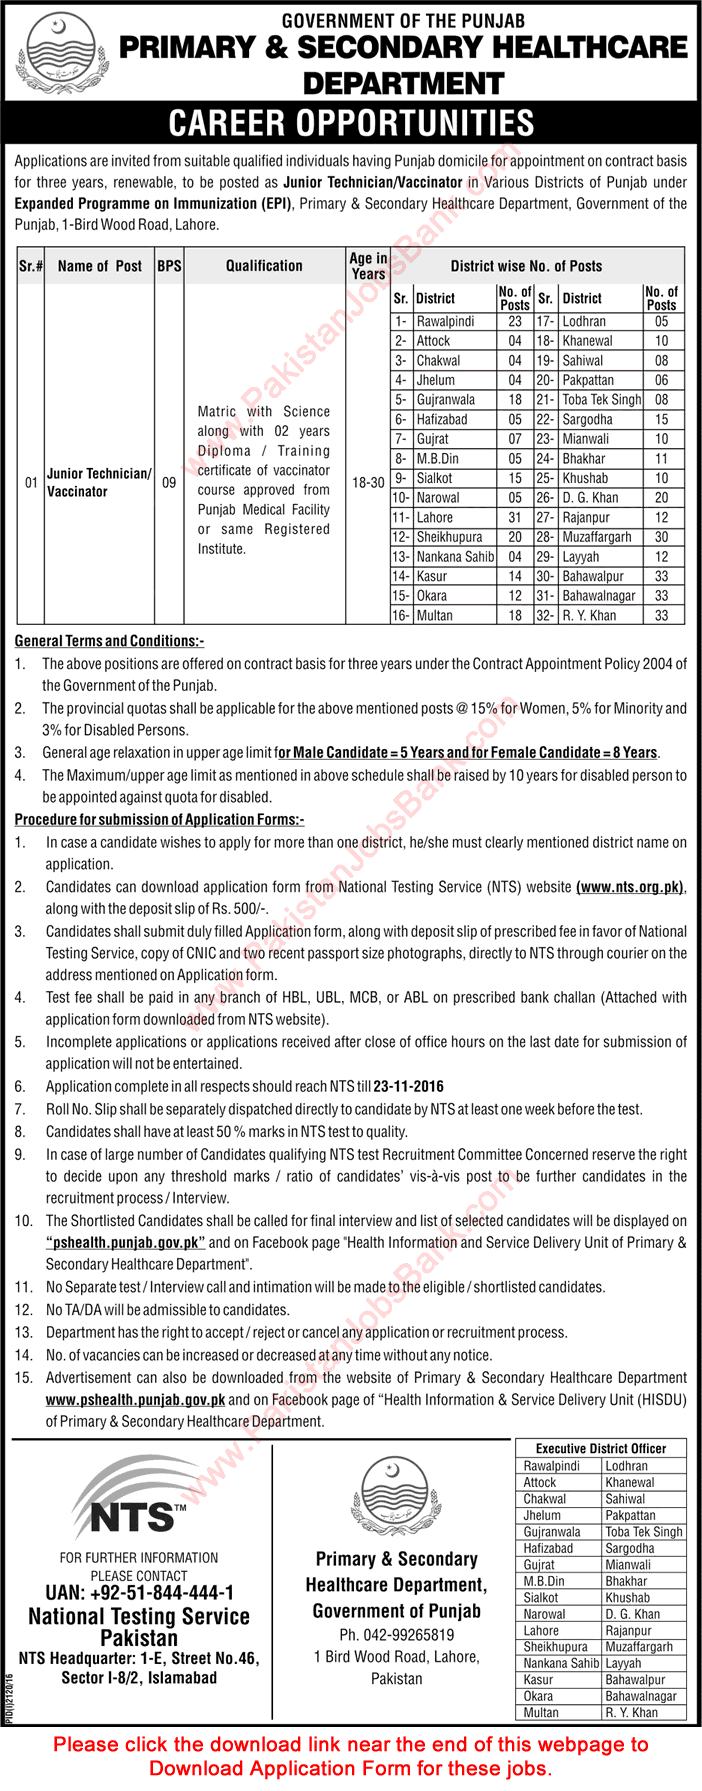 Vaccinator Jobs in Primary and Secondary Healthcare Department Punjab October 2016 November NTS Application Form Latest